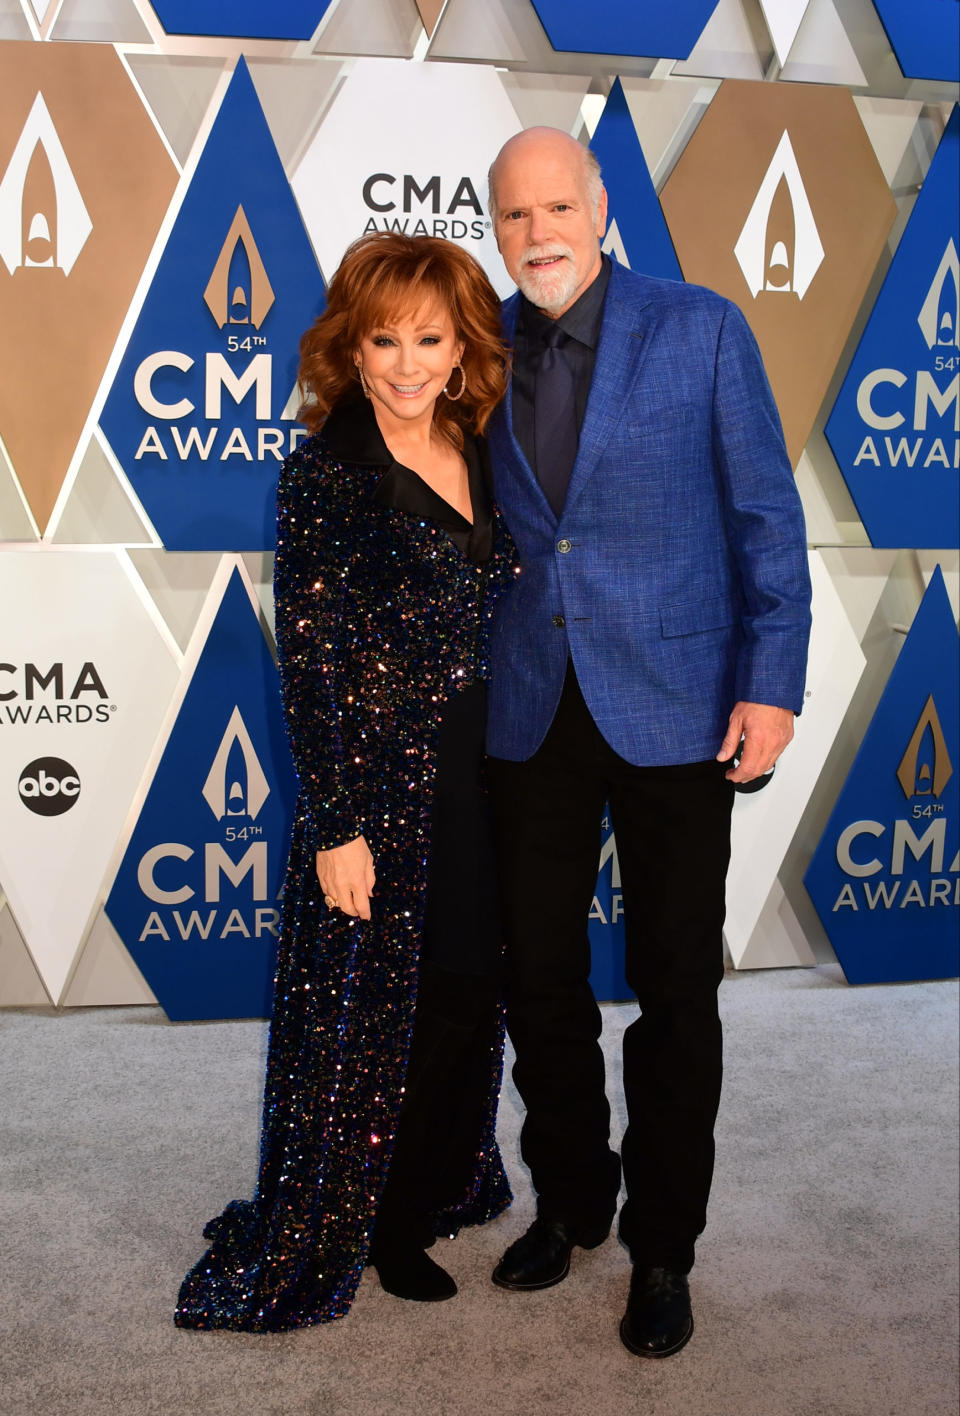 THE 54TH ANNUAL CMA AWARDS – The 54th Annual CMA Awards, hosted by Reba McEntire and <span class="caas-xray-inline-tooltip"><span class="caas-xray-inline caas-xray-entity caas-xray-pill rapid-nonanchor-lt" data-entity-id="Darius_Rucker" data-ylk="cid:Darius_Rucker;pos:4;elmt:wiki;sec:pill-inline-entity;elm:pill-inline-text;itc:1;cat:Musician;" tabindex="0" aria-haspopup="dialog"><a href="https://search.yahoo.com/search?p=Darius%20Rucker" data-i13n="cid:Darius_Rucker;pos:4;elmt:wiki;sec:pill-inline-entity;elm:pill-inline-text;itc:1;cat:Musician;" tabindex="-1" data-ylk="slk:Darius Rucker;cid:Darius_Rucker;pos:4;elmt:wiki;sec:pill-inline-entity;elm:pill-inline-text;itc:1;cat:Musician;" class="link ">Darius Rucker</a></span></span> aired from Nashvilles Music City Center, WEDNESDAY, NOV. 11 (8:00-11:00 p.m. EST), on ABC. (ABC via Getty Images)REBA MCENTIRE, REX LINN